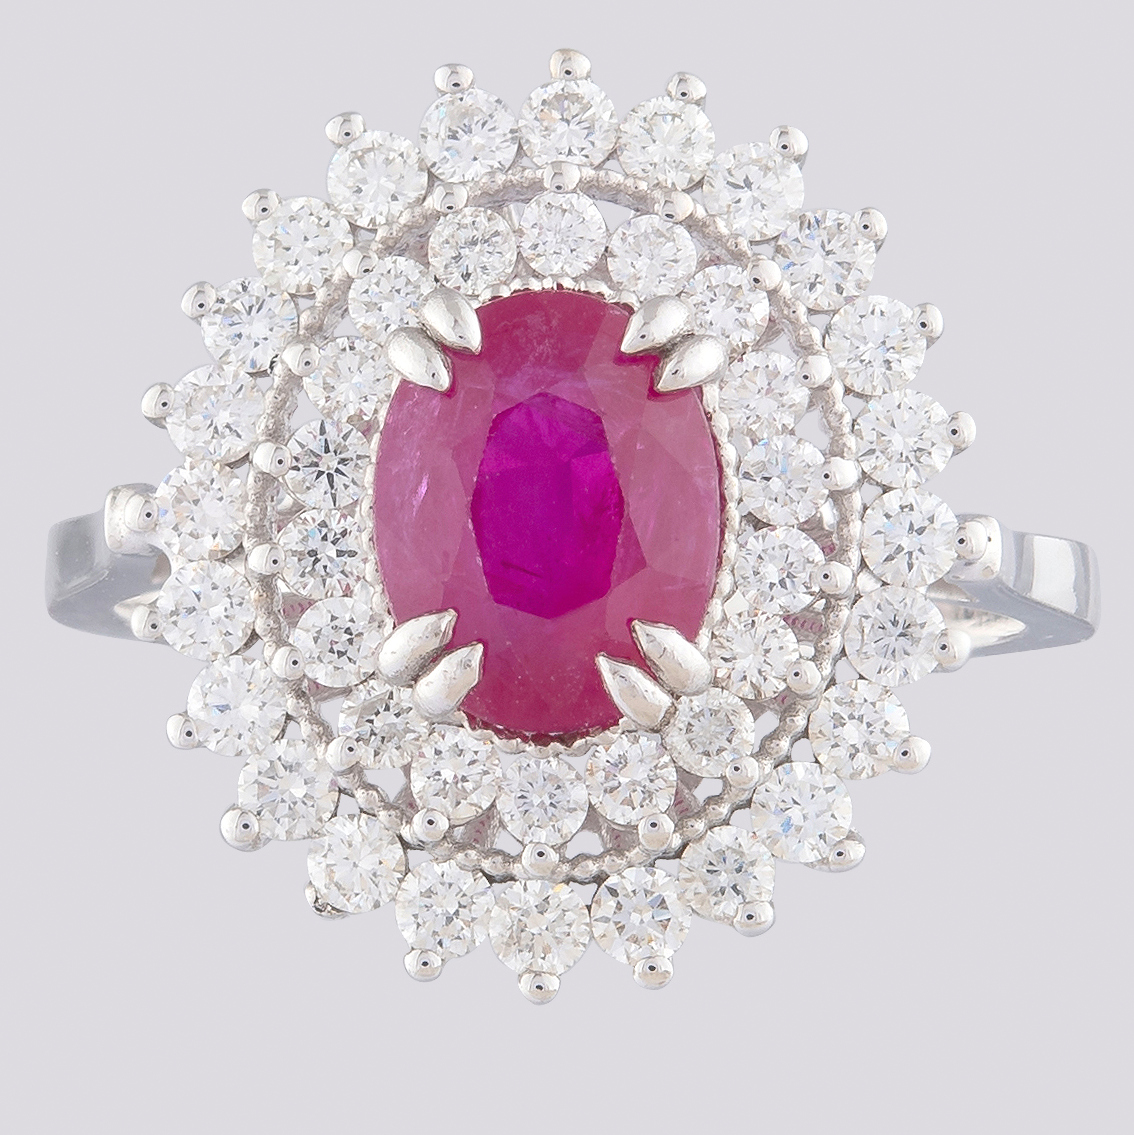 14K White Gold Cluster Ring 1.90 Ct. Natural Ruby - 1.00 Ct. Diamond - Image 3 of 4